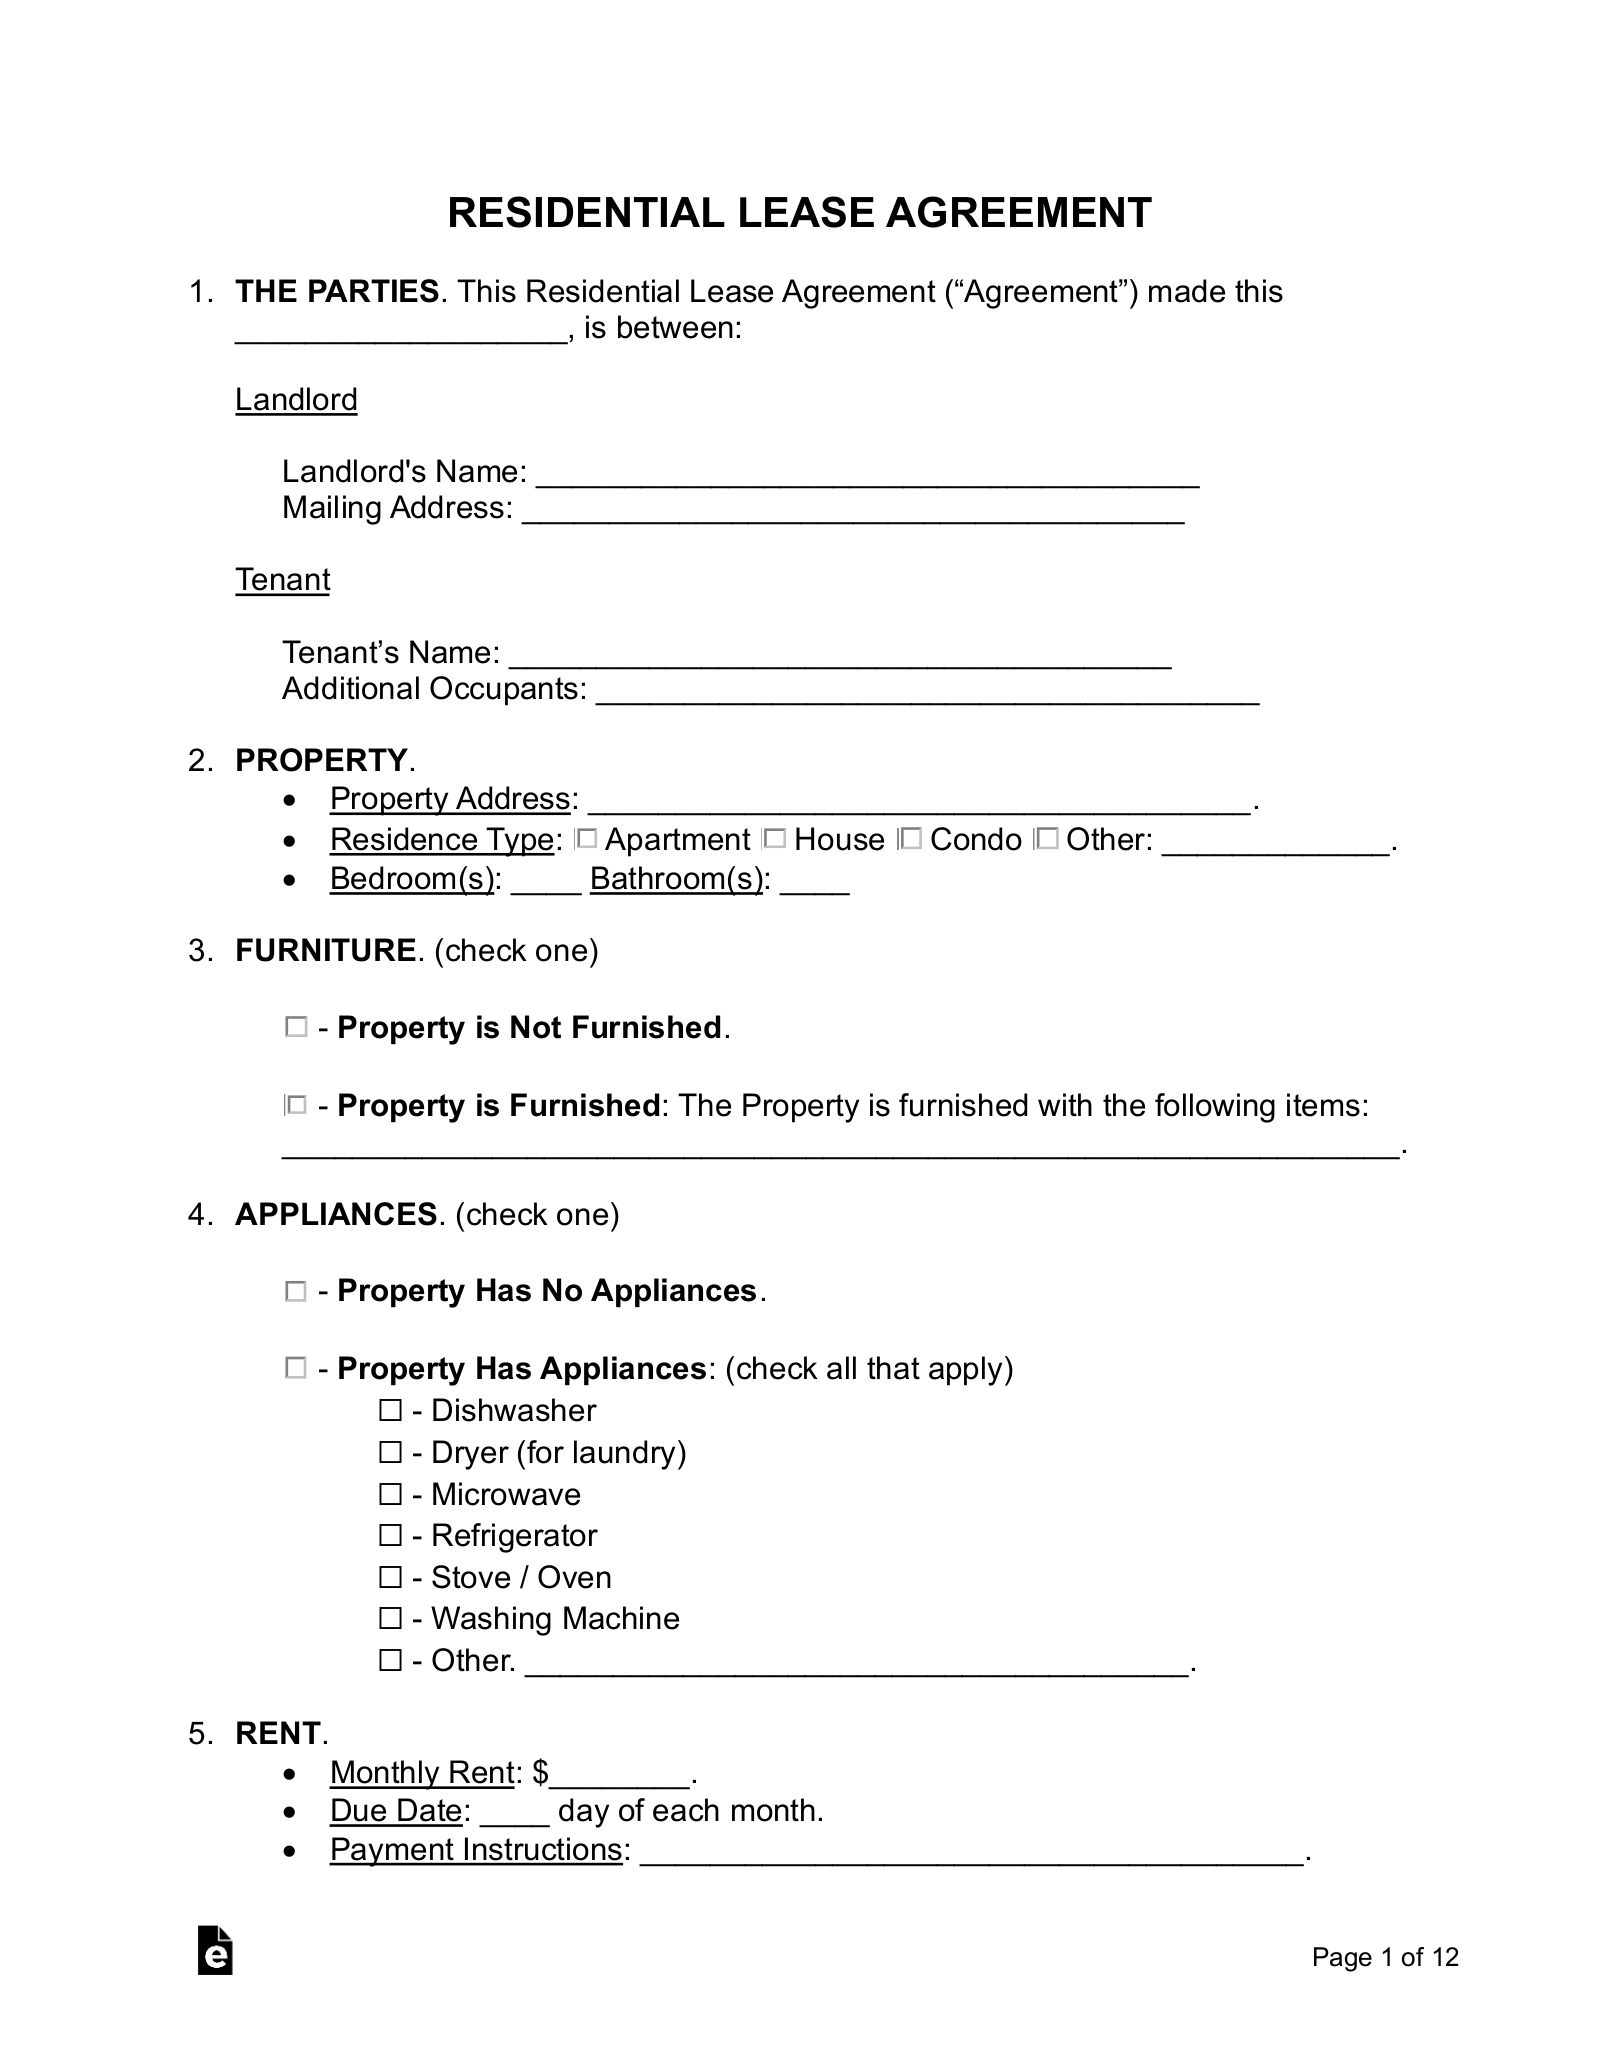 Free Rental / Lease Agreement Templates (15) - Pdf | Word – Eforms - Free Printable Agreement Forms